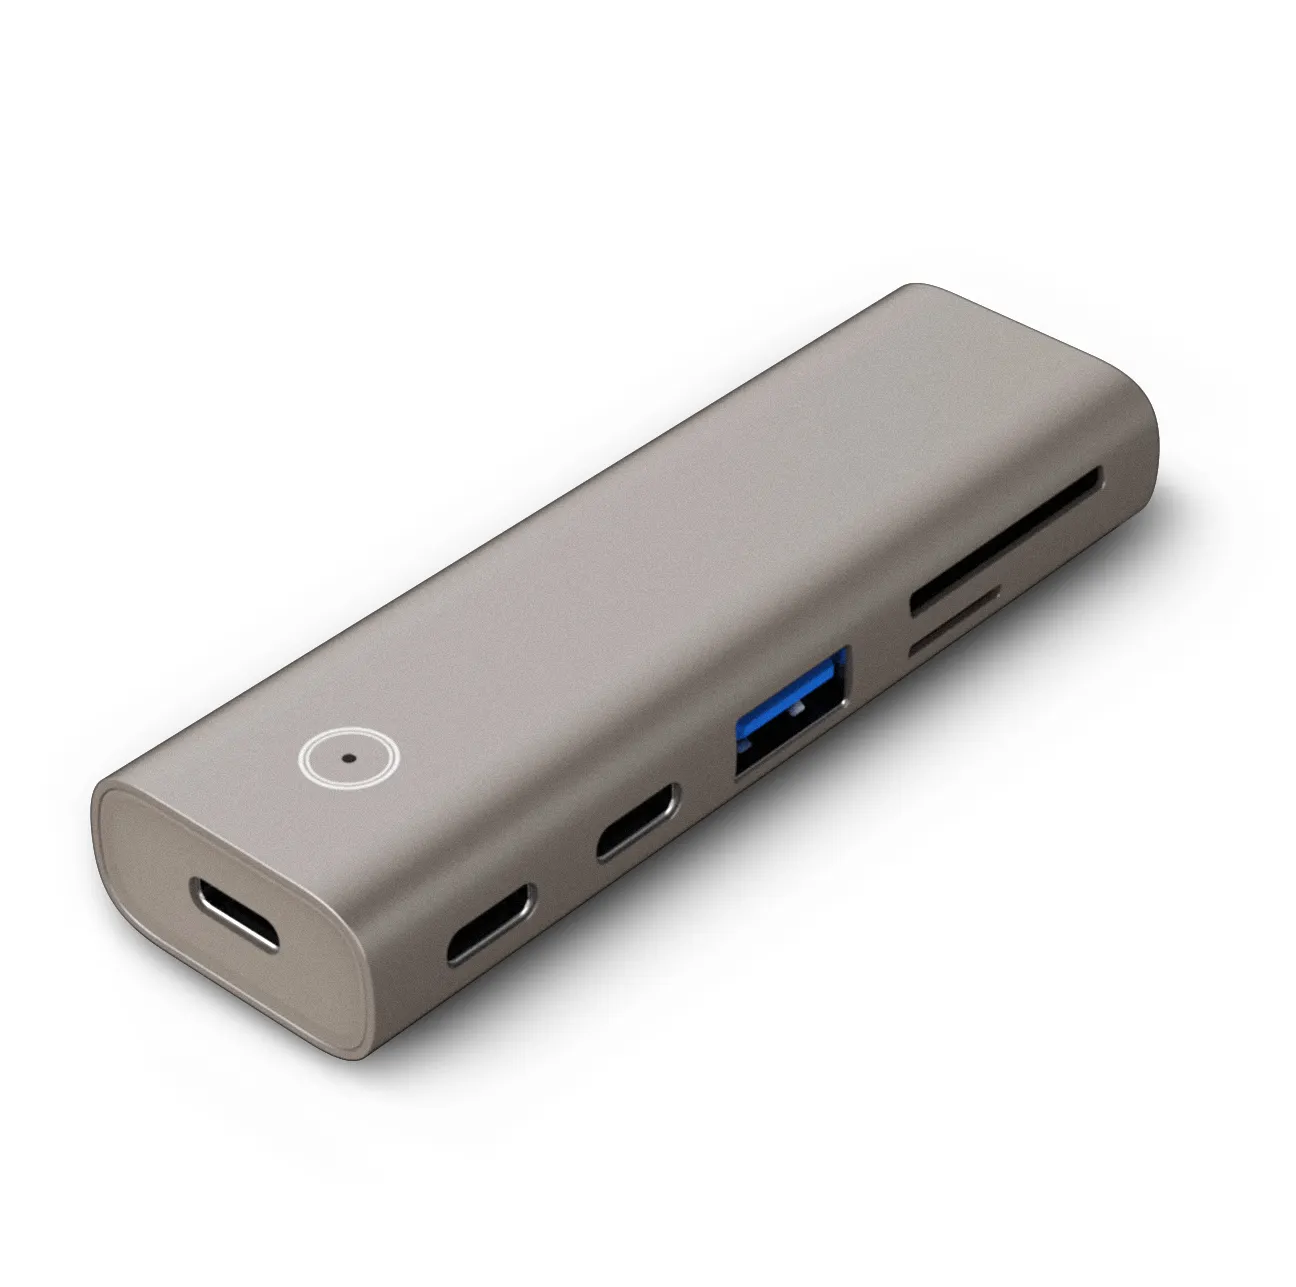 USB C 4 in 1 Docking Station Aluminum Alloy with 100W PD/ USB 3.0/2.0, SD/TF Card Reader